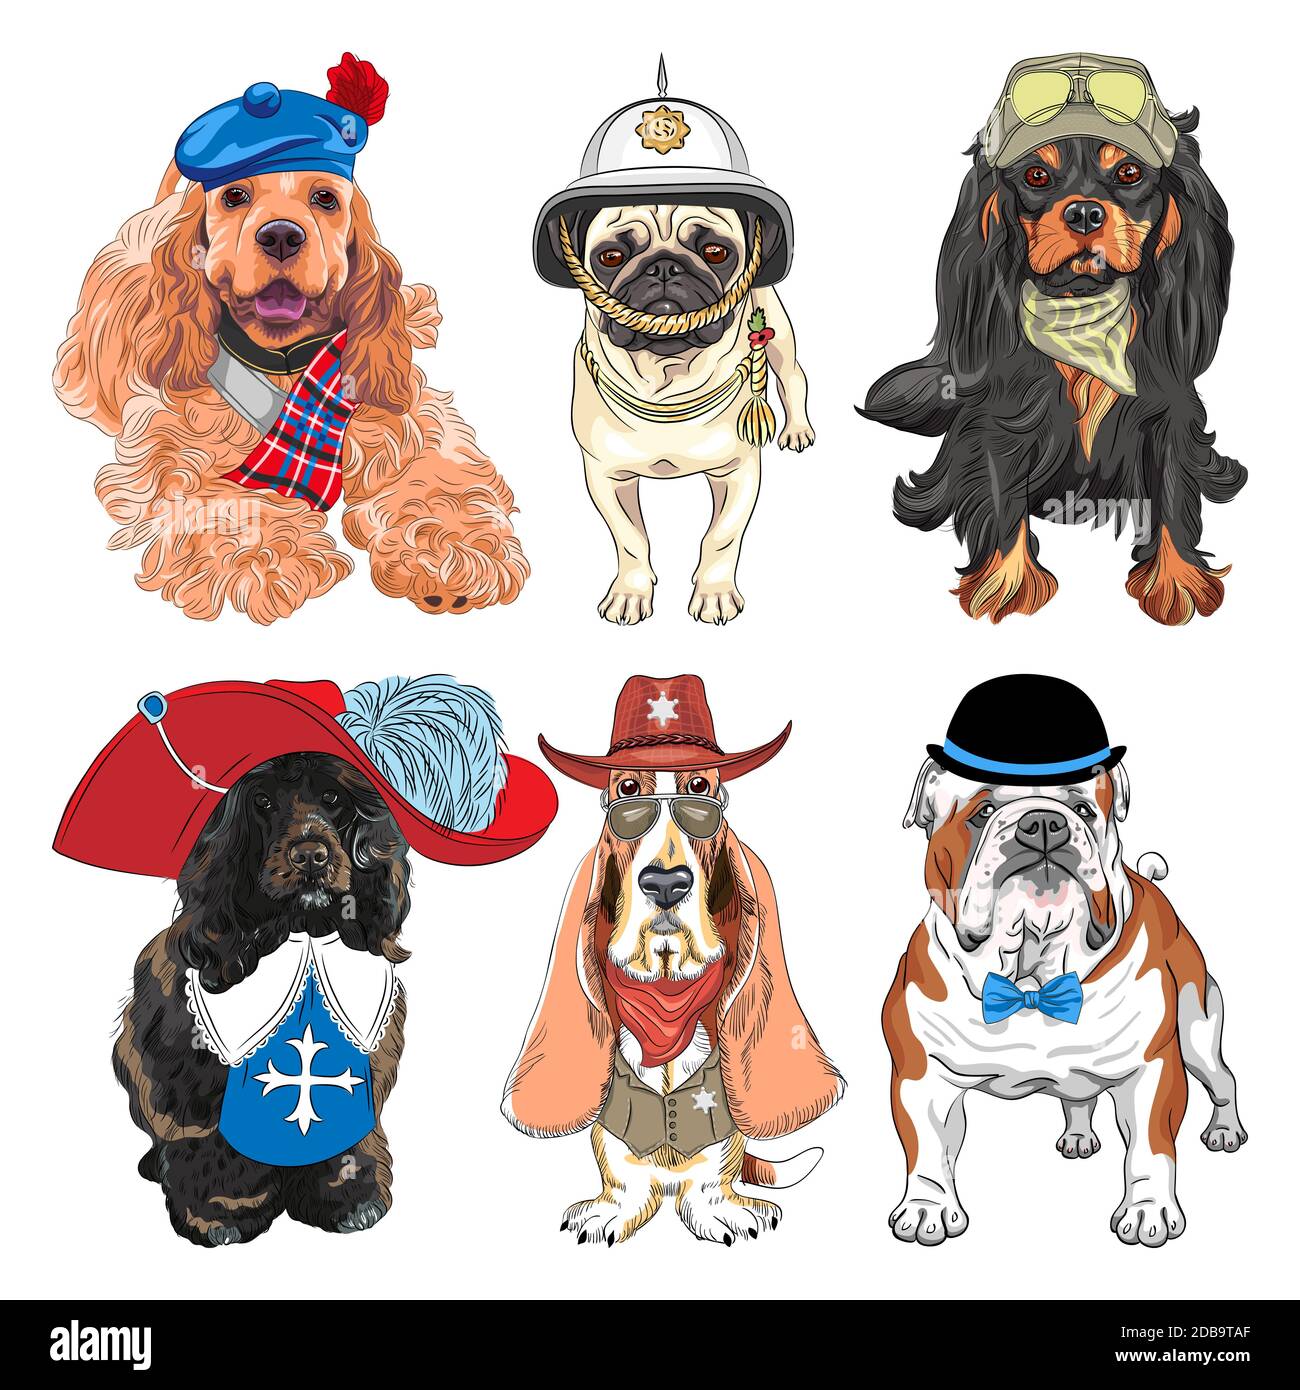 Set of dogs. Cavalier King Charles Spaniel, Basset Hound as sheriff, English Bulldog, Portuguese Water Dog as musketeer, Pug in British helmet Stock Photo